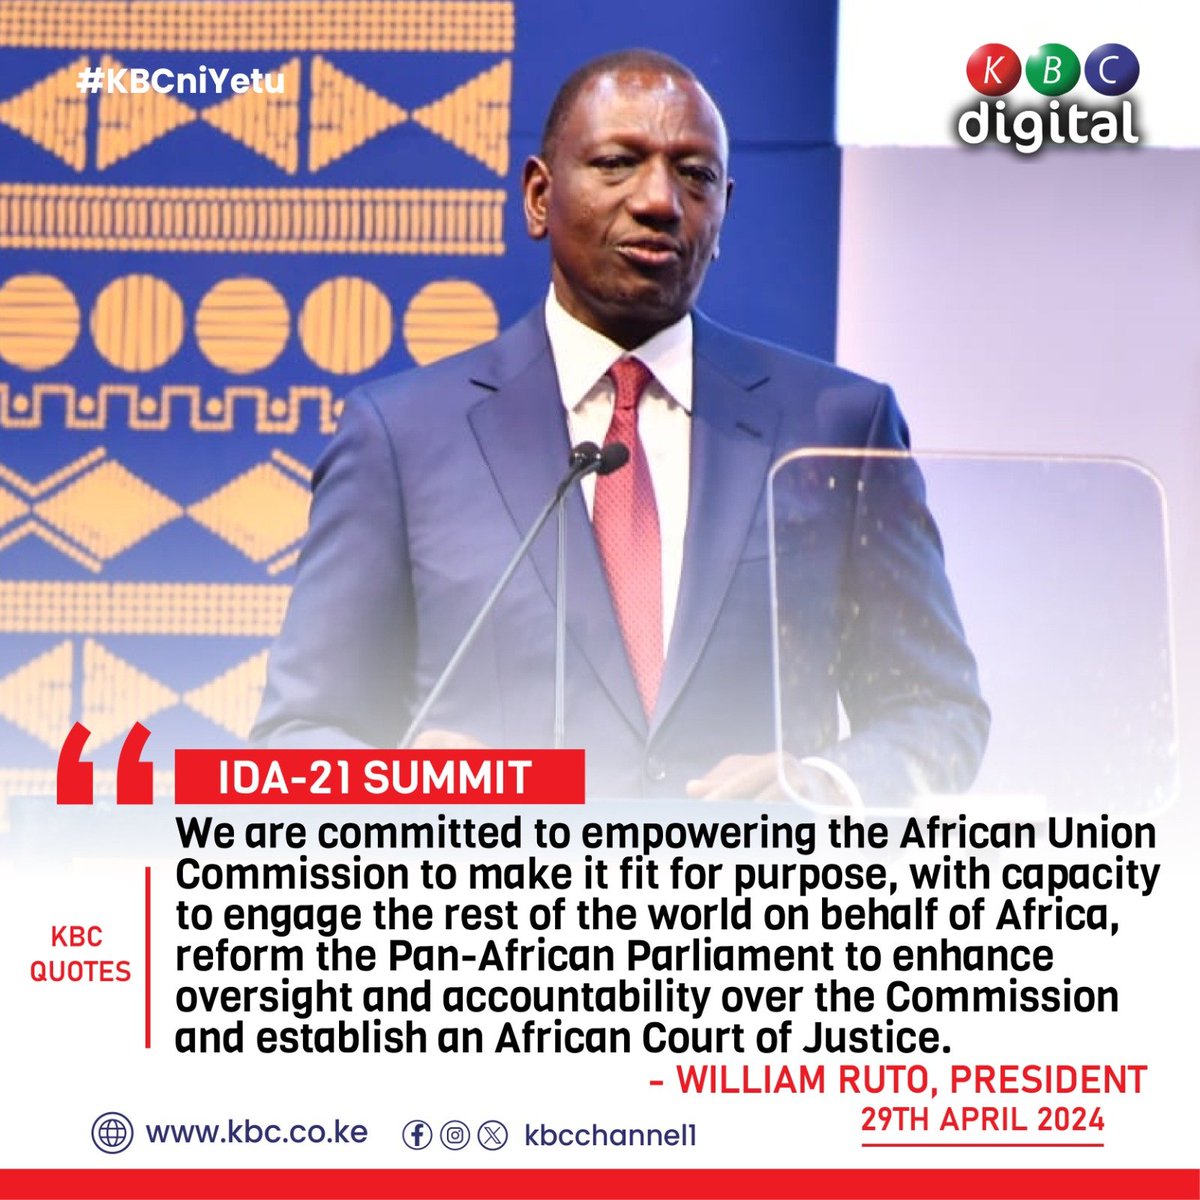 'We call on our partners to respond effectively by increasing their IDA contribution from the US$93 billion raised in 2021 to at least US$120 billion in 2024.' -William Ruto, President #idaworks #ida21nairobi #kenya^EM